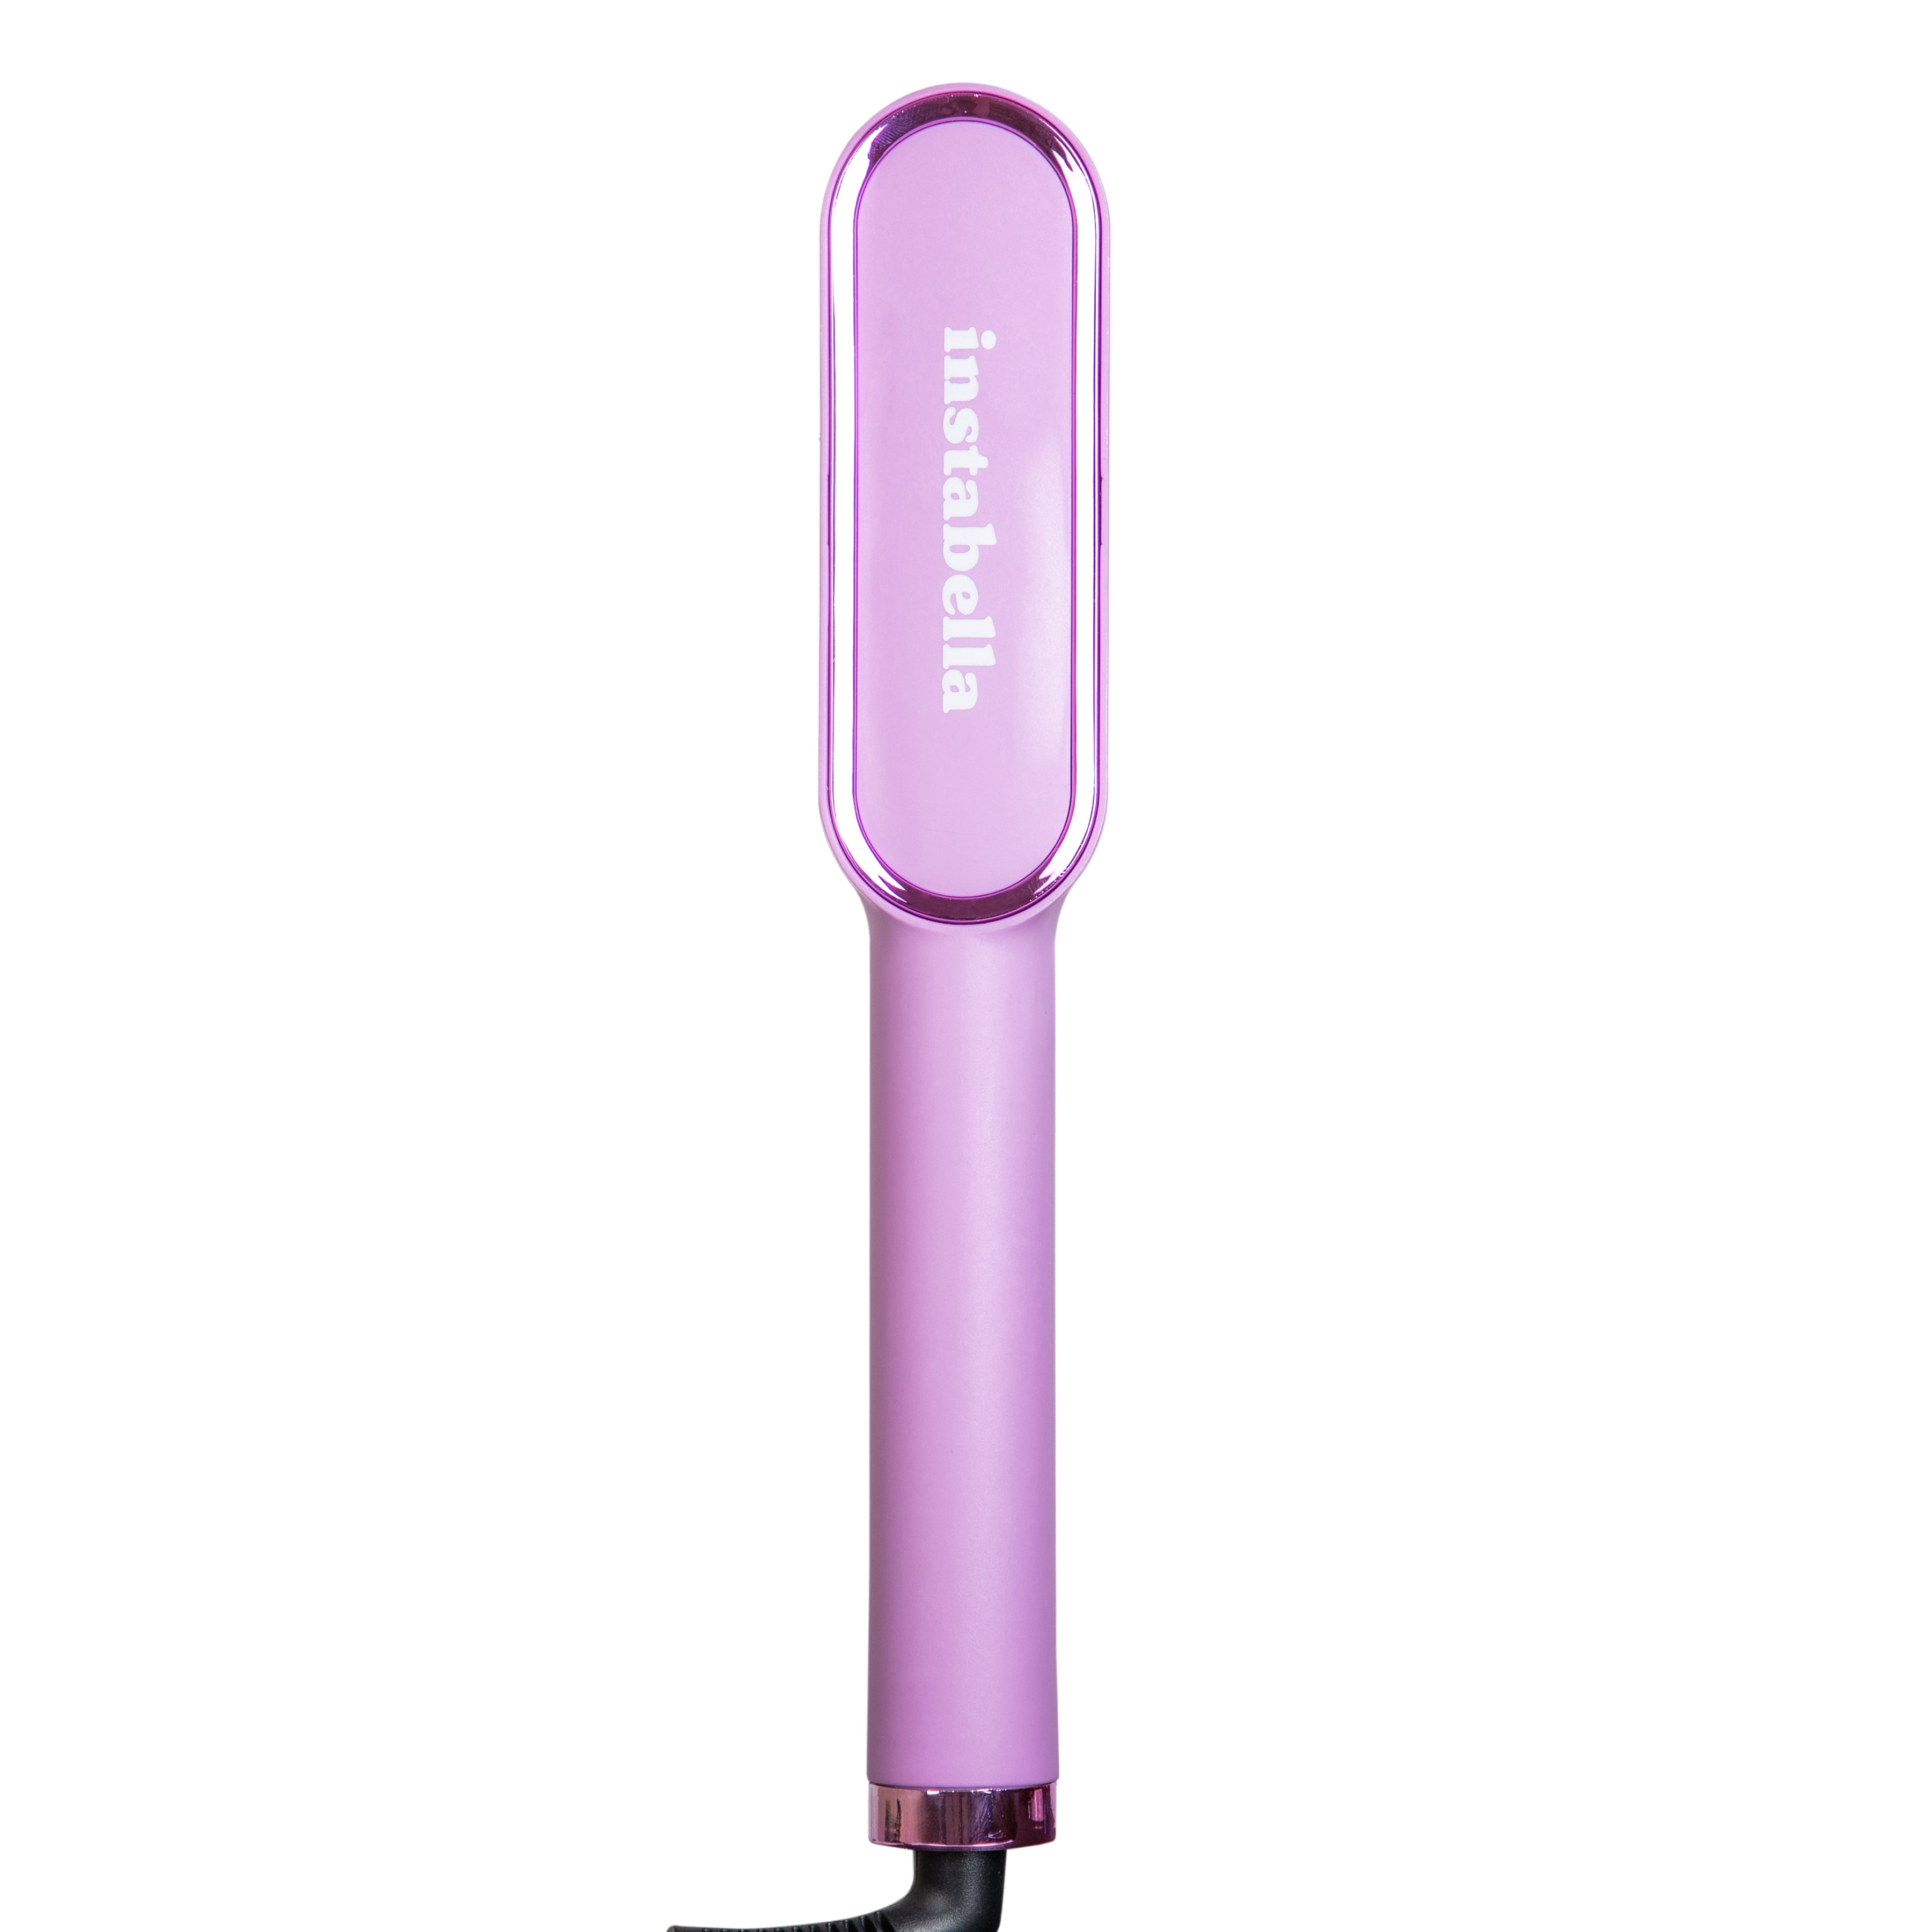 [BROWN BOX] Instabella Fantasia 2-in-1 Professional Straightening & Curling Comb HB-476